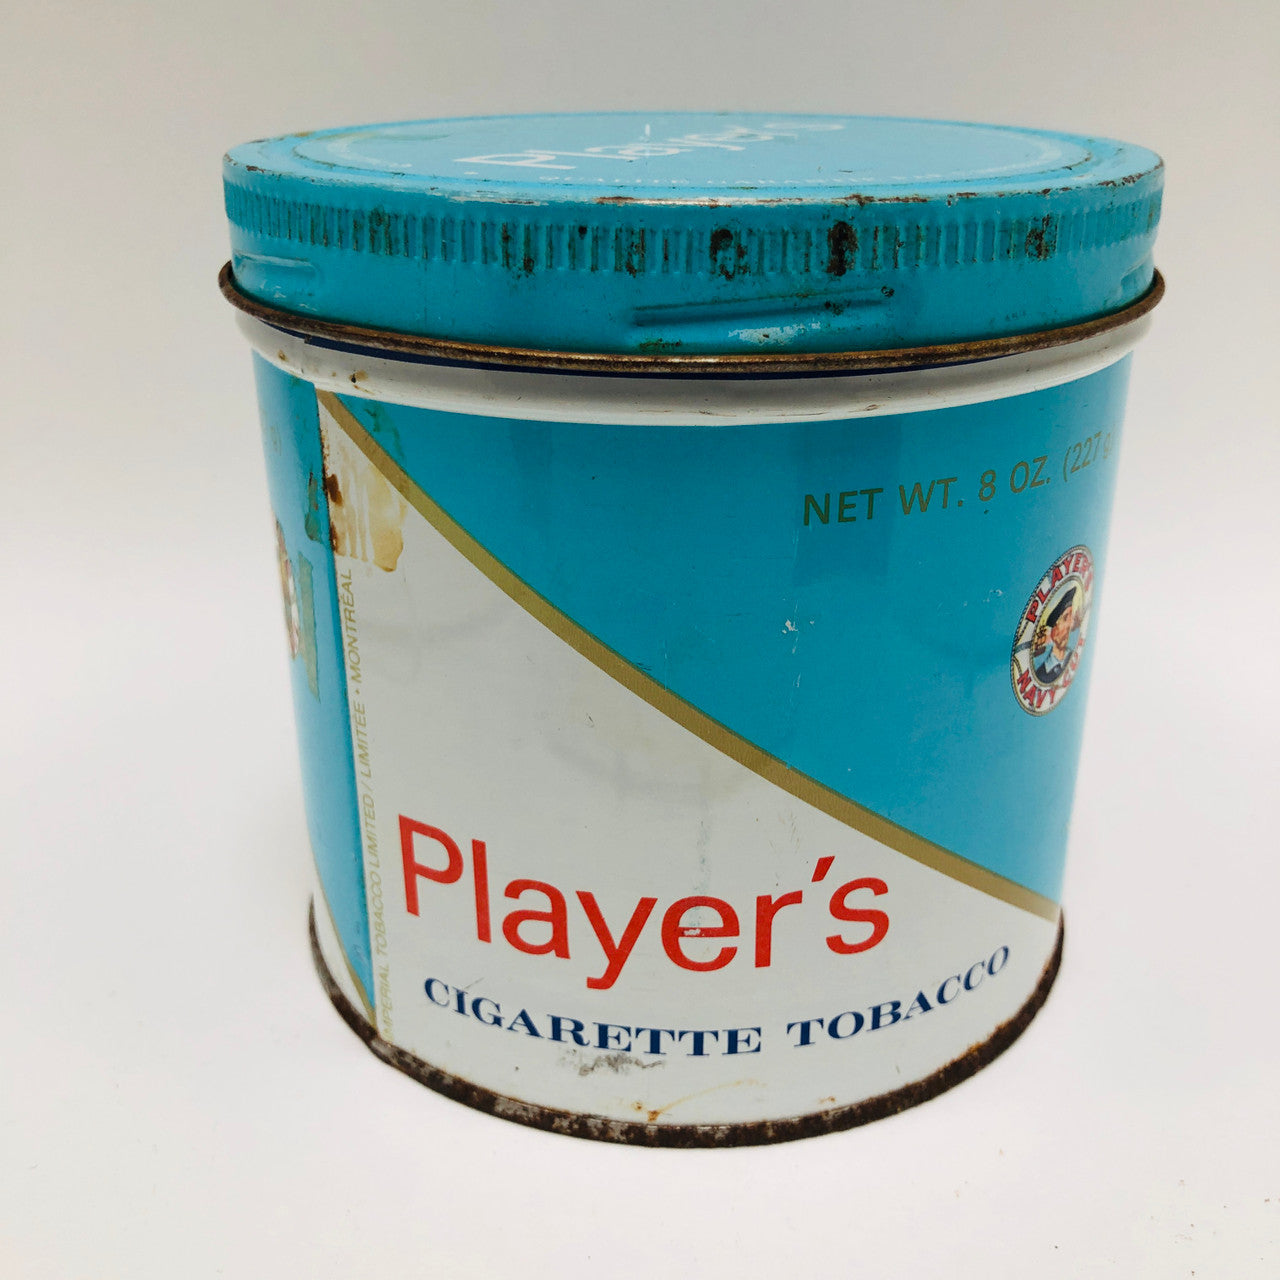 Vintage, Metal, Round, Player's, Tobacco Tin, Canister